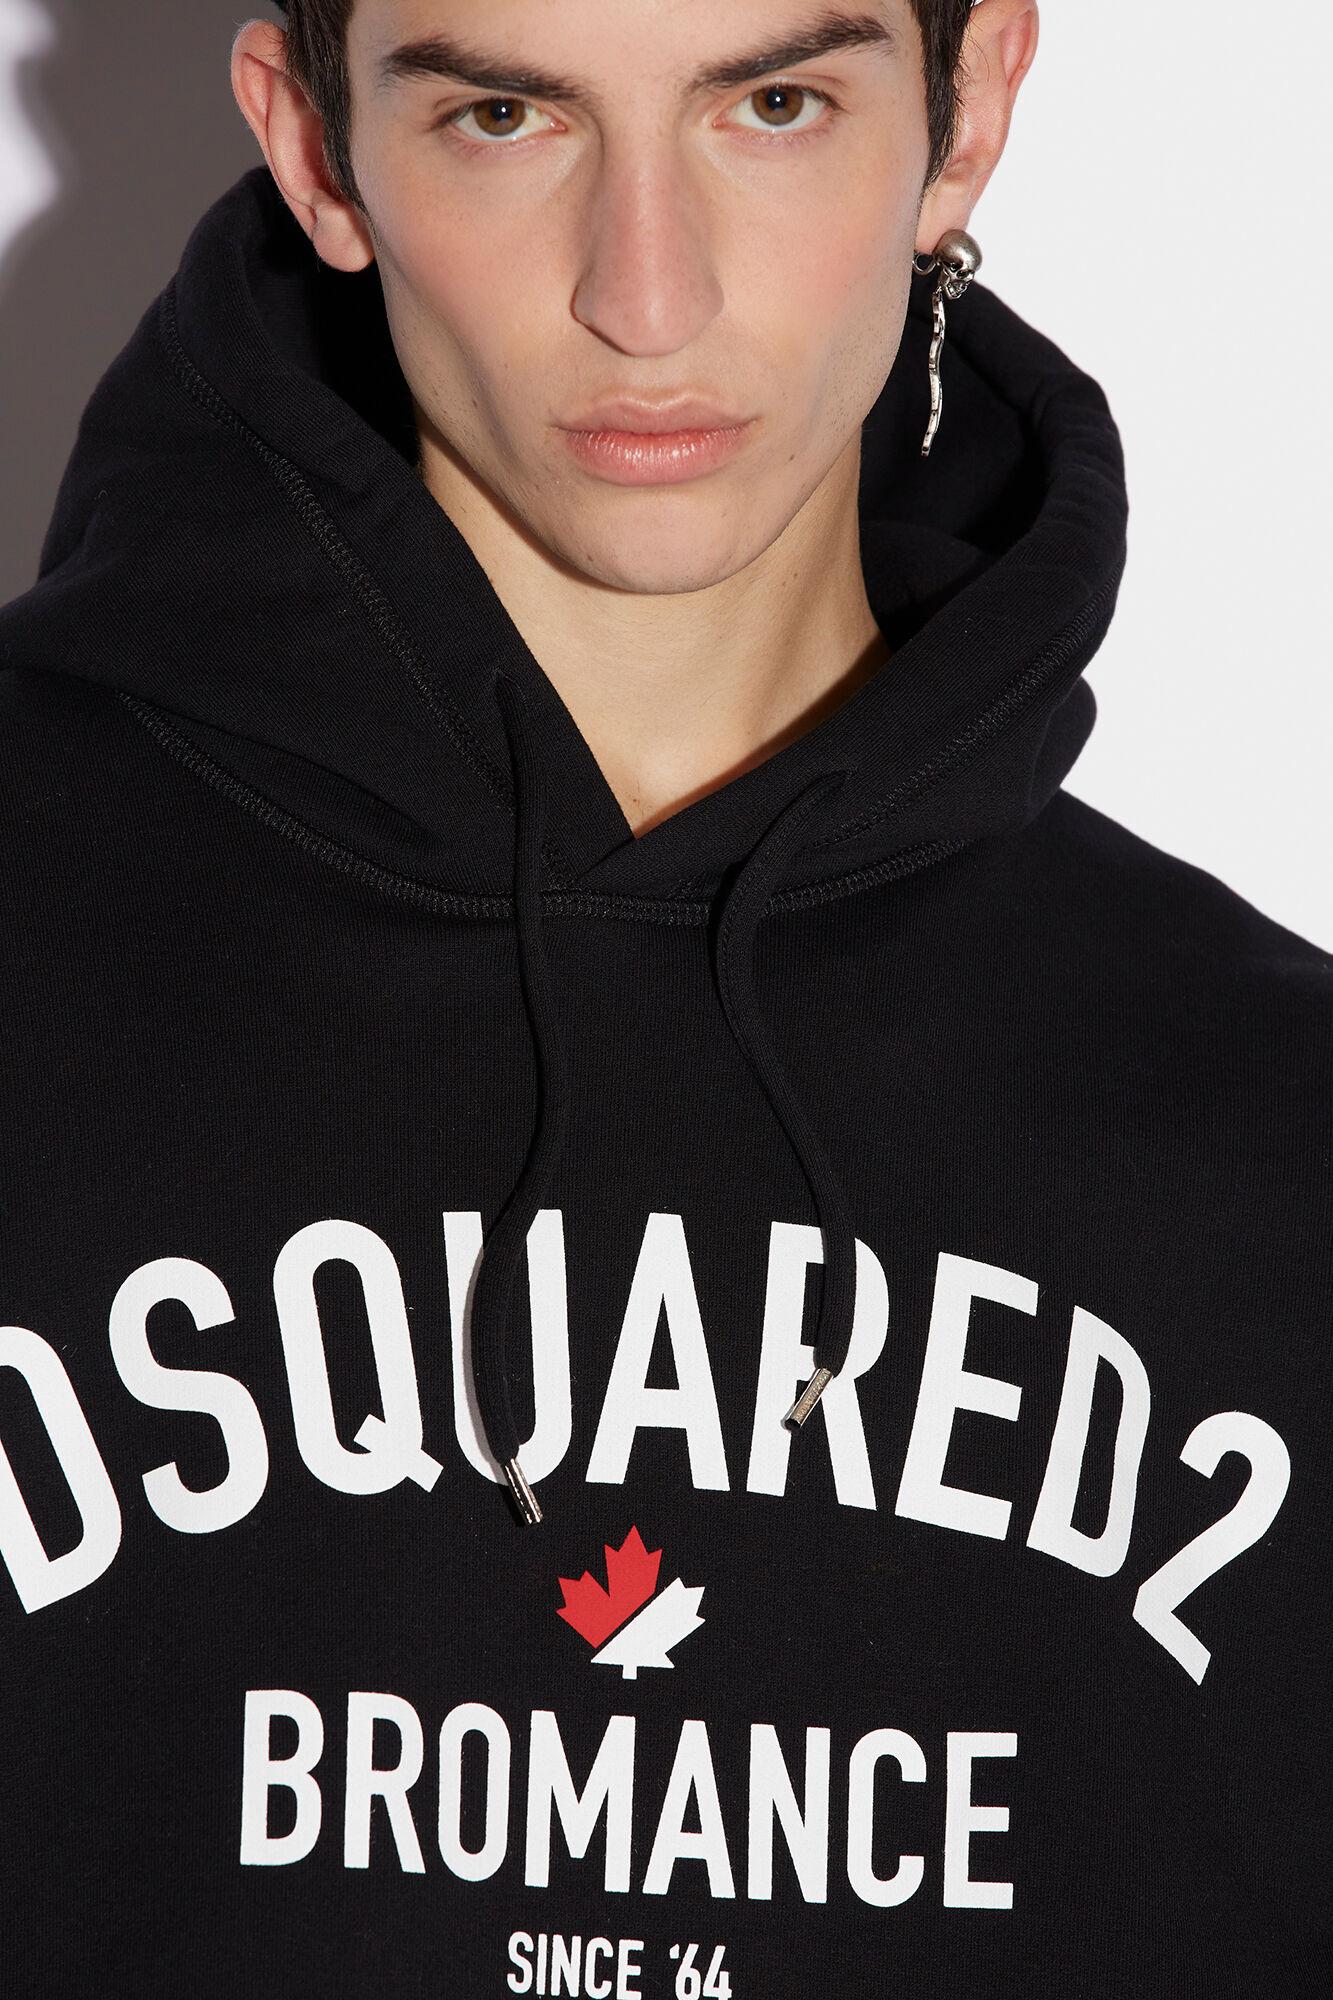 DSQUARED2 BROMANCE SLOUCH HOODIE